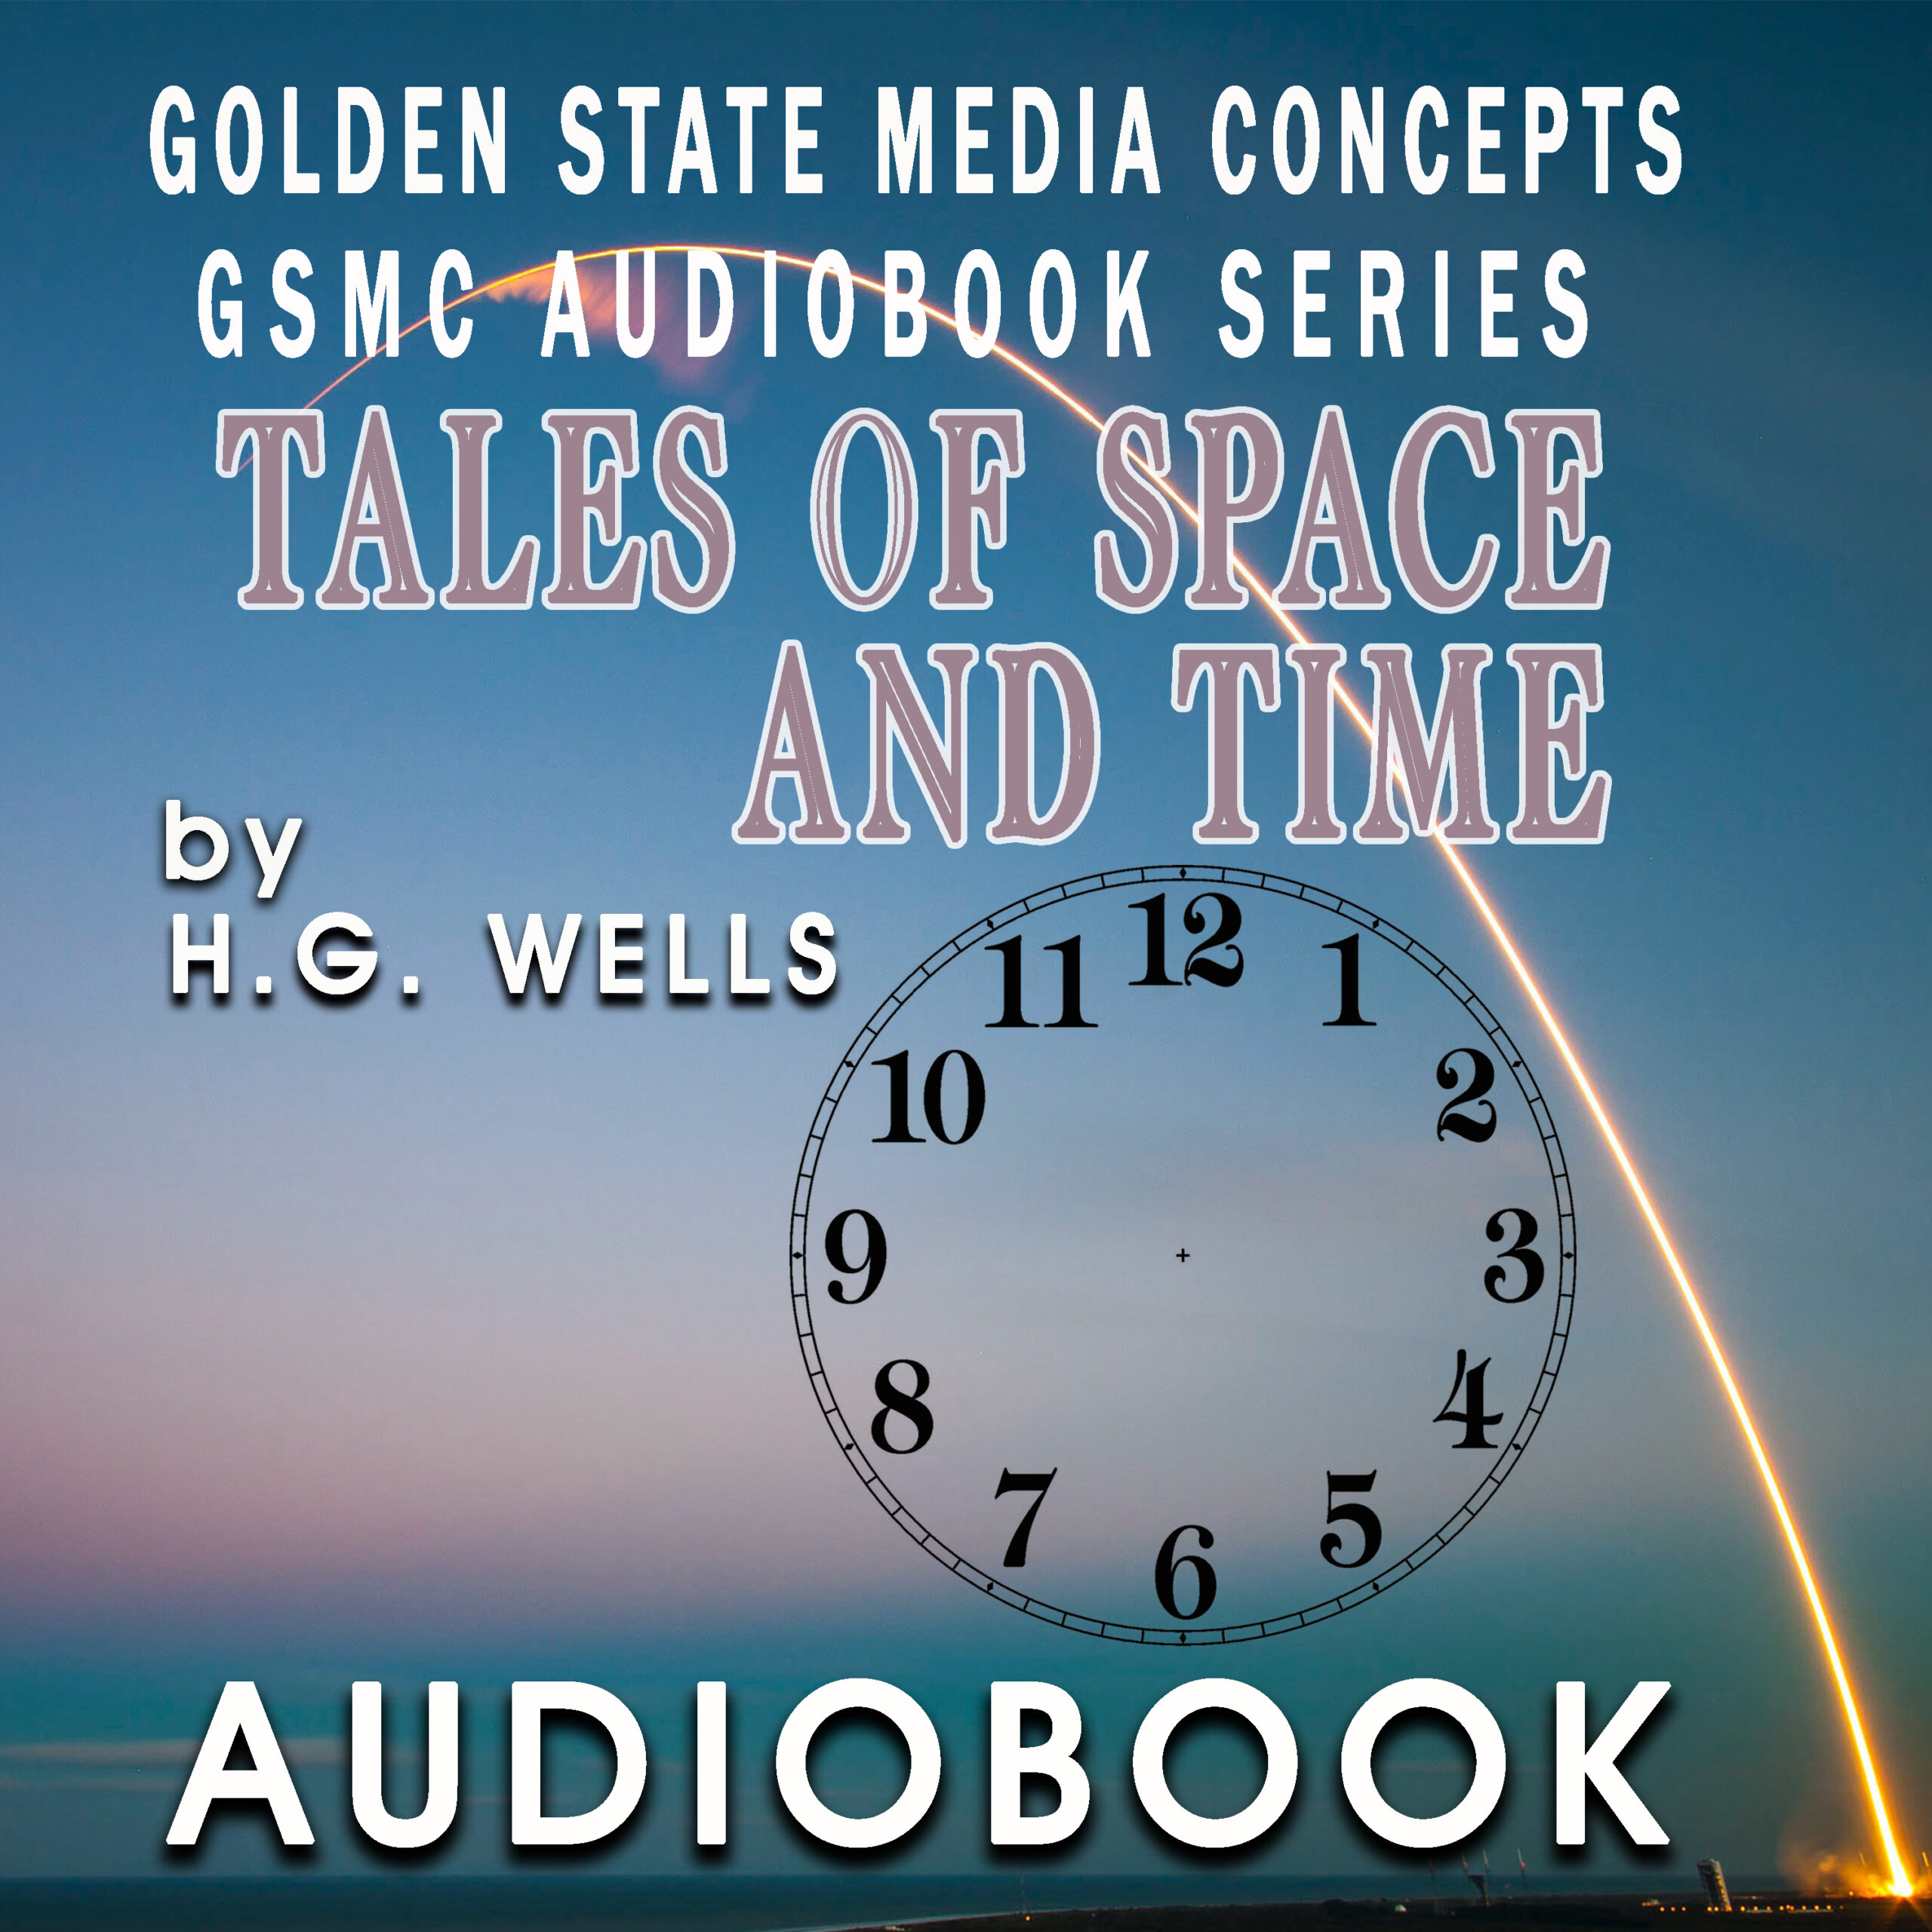 GSMC Audiobook Series: Tales of Space and Time